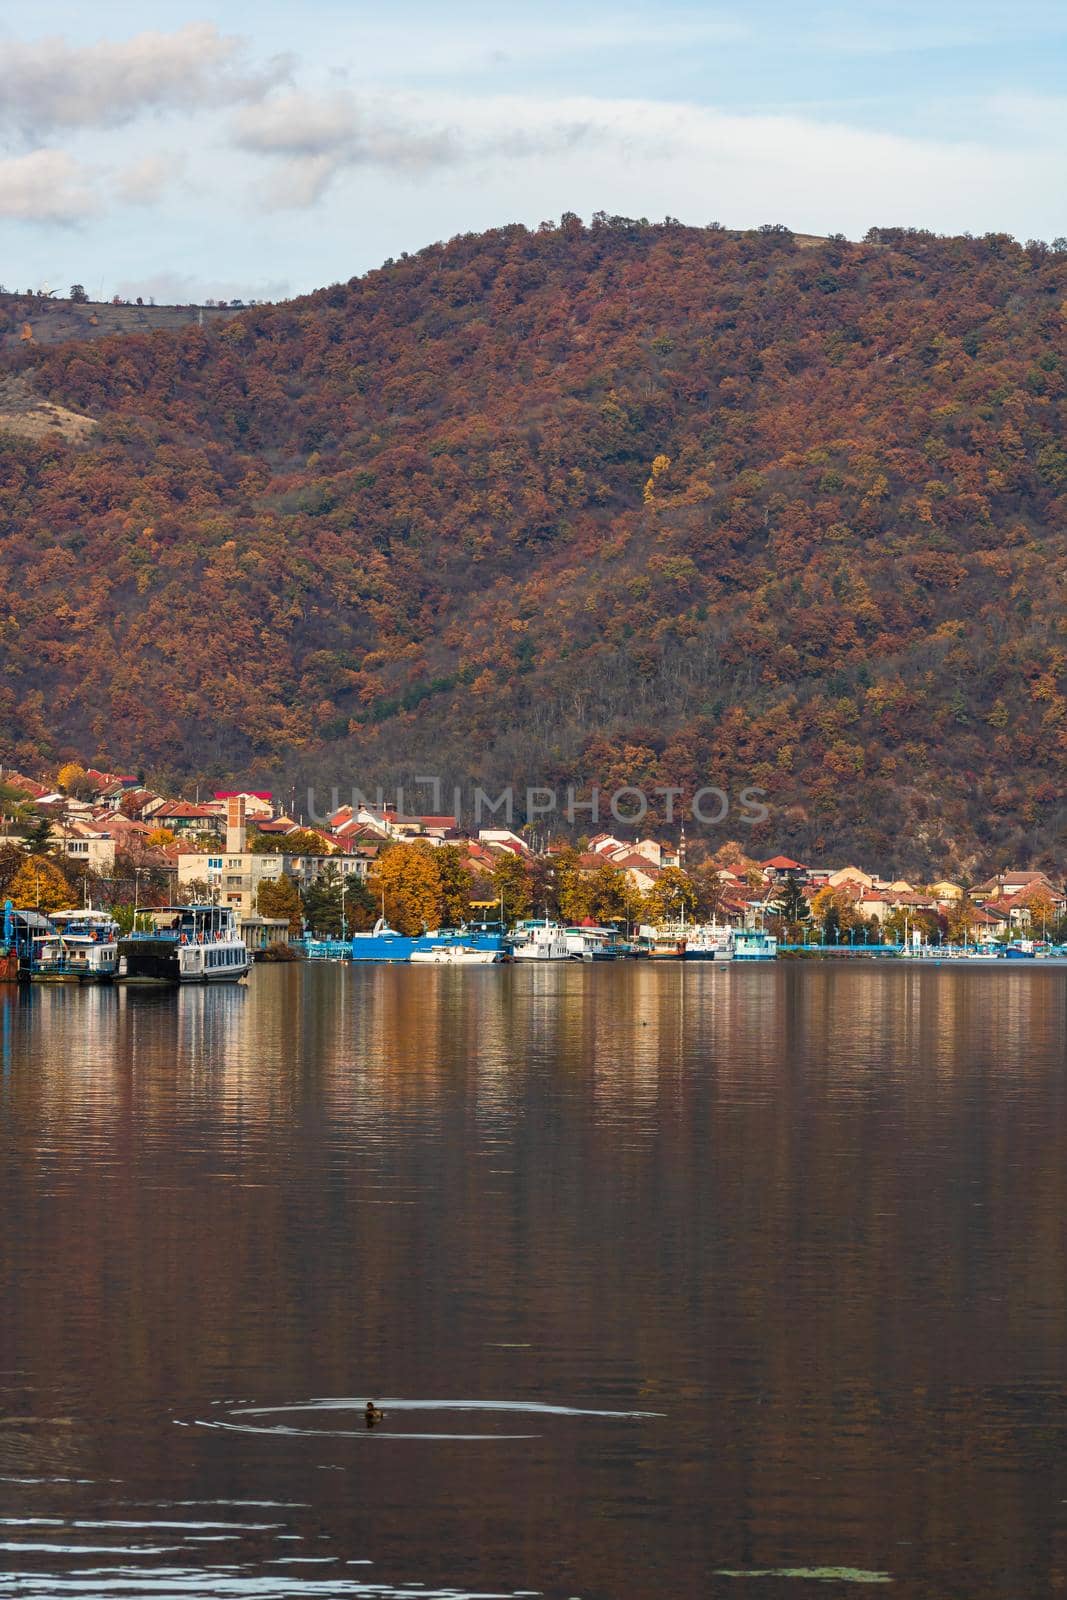 View of Danube river and Orsova city, waterfront view. Orsova, Romania, 2020 by vladispas